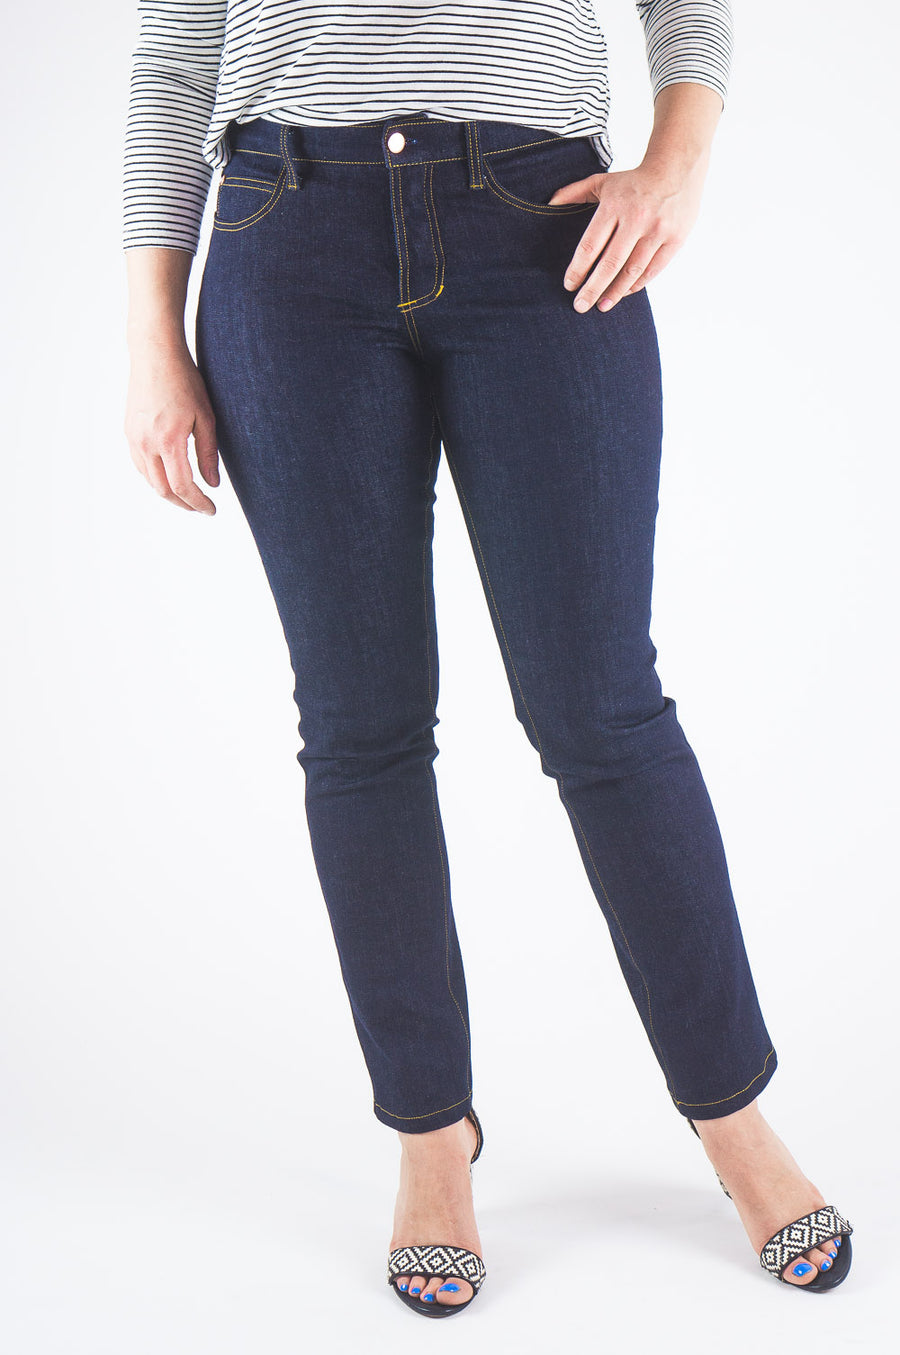 Closet Core Ginger Skinny Jeans Pattern - The Confident Stitch